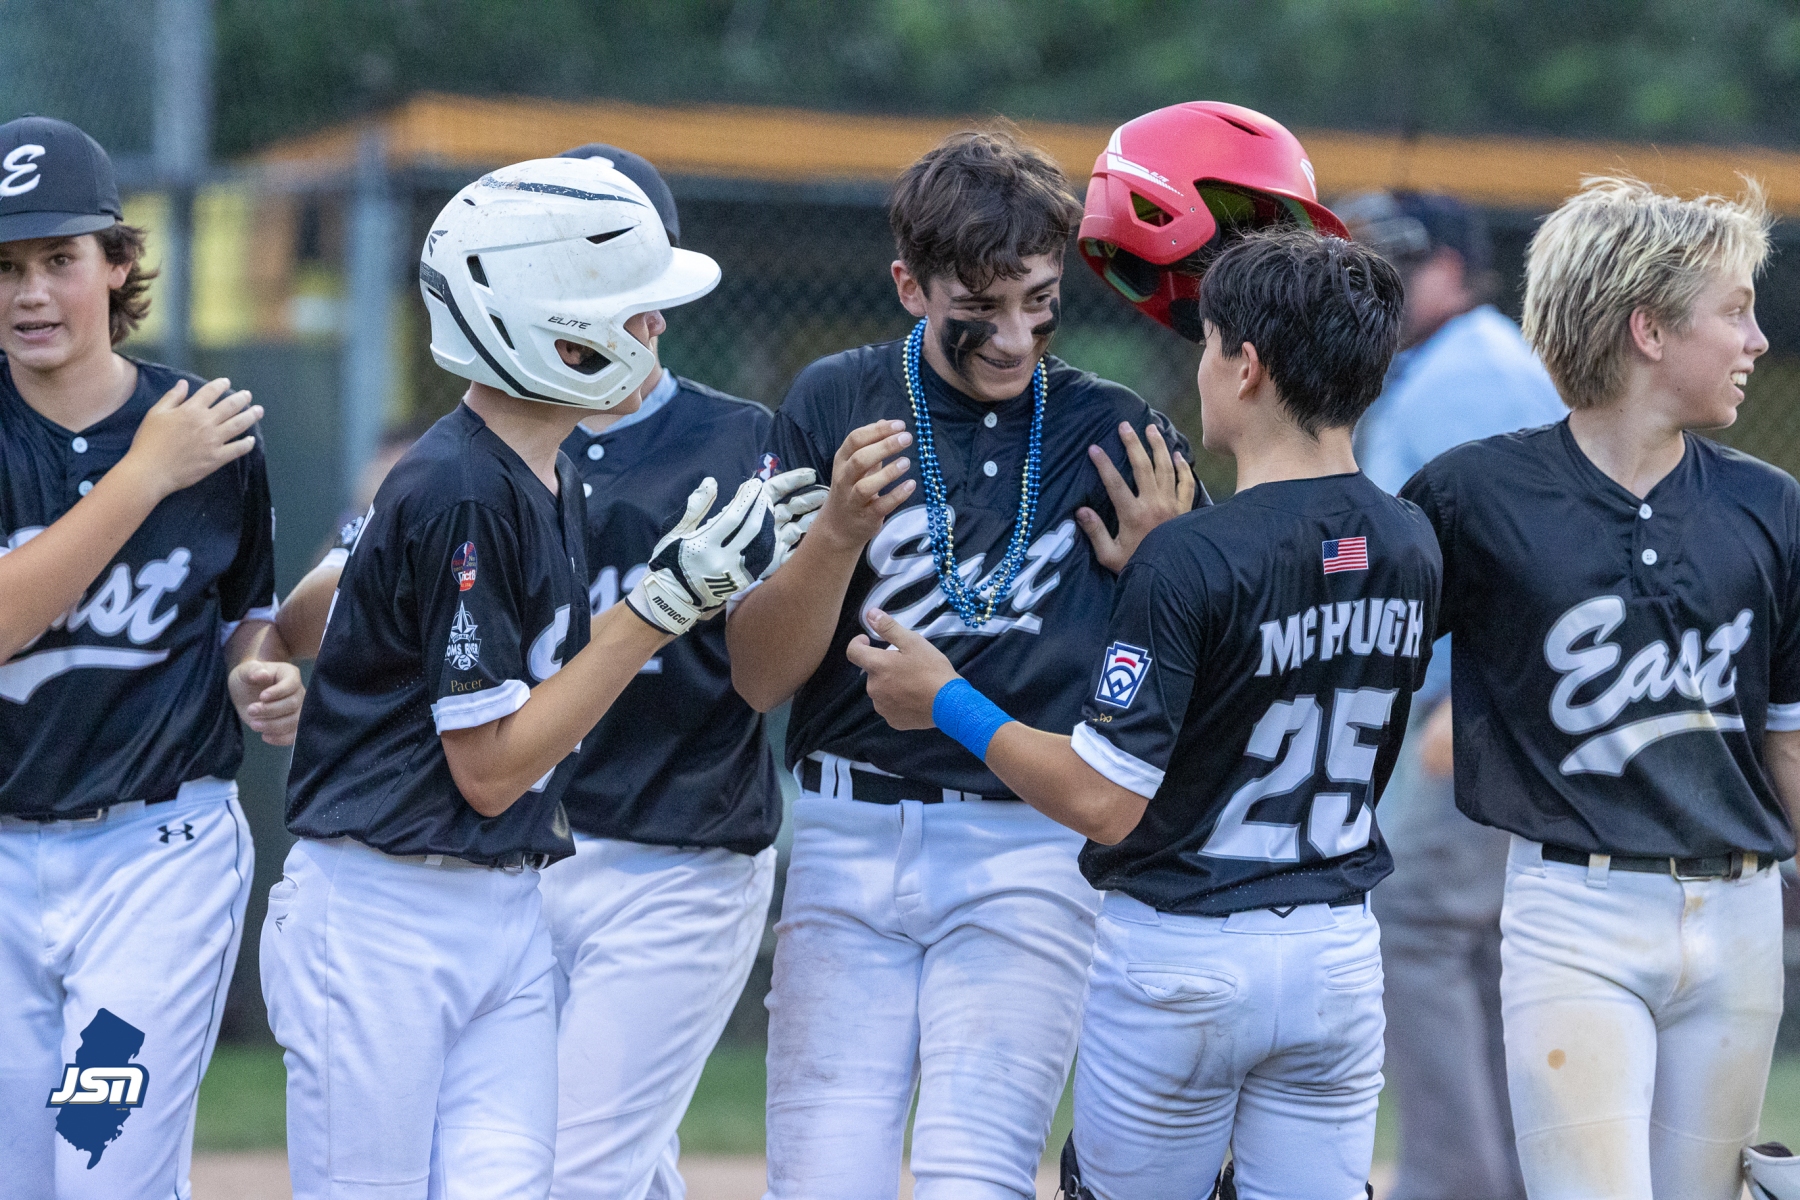 IMAGES: 2023 New Jersey Section 3 Little League Intermediate 50/70  Tournament - Jersey Sporting News